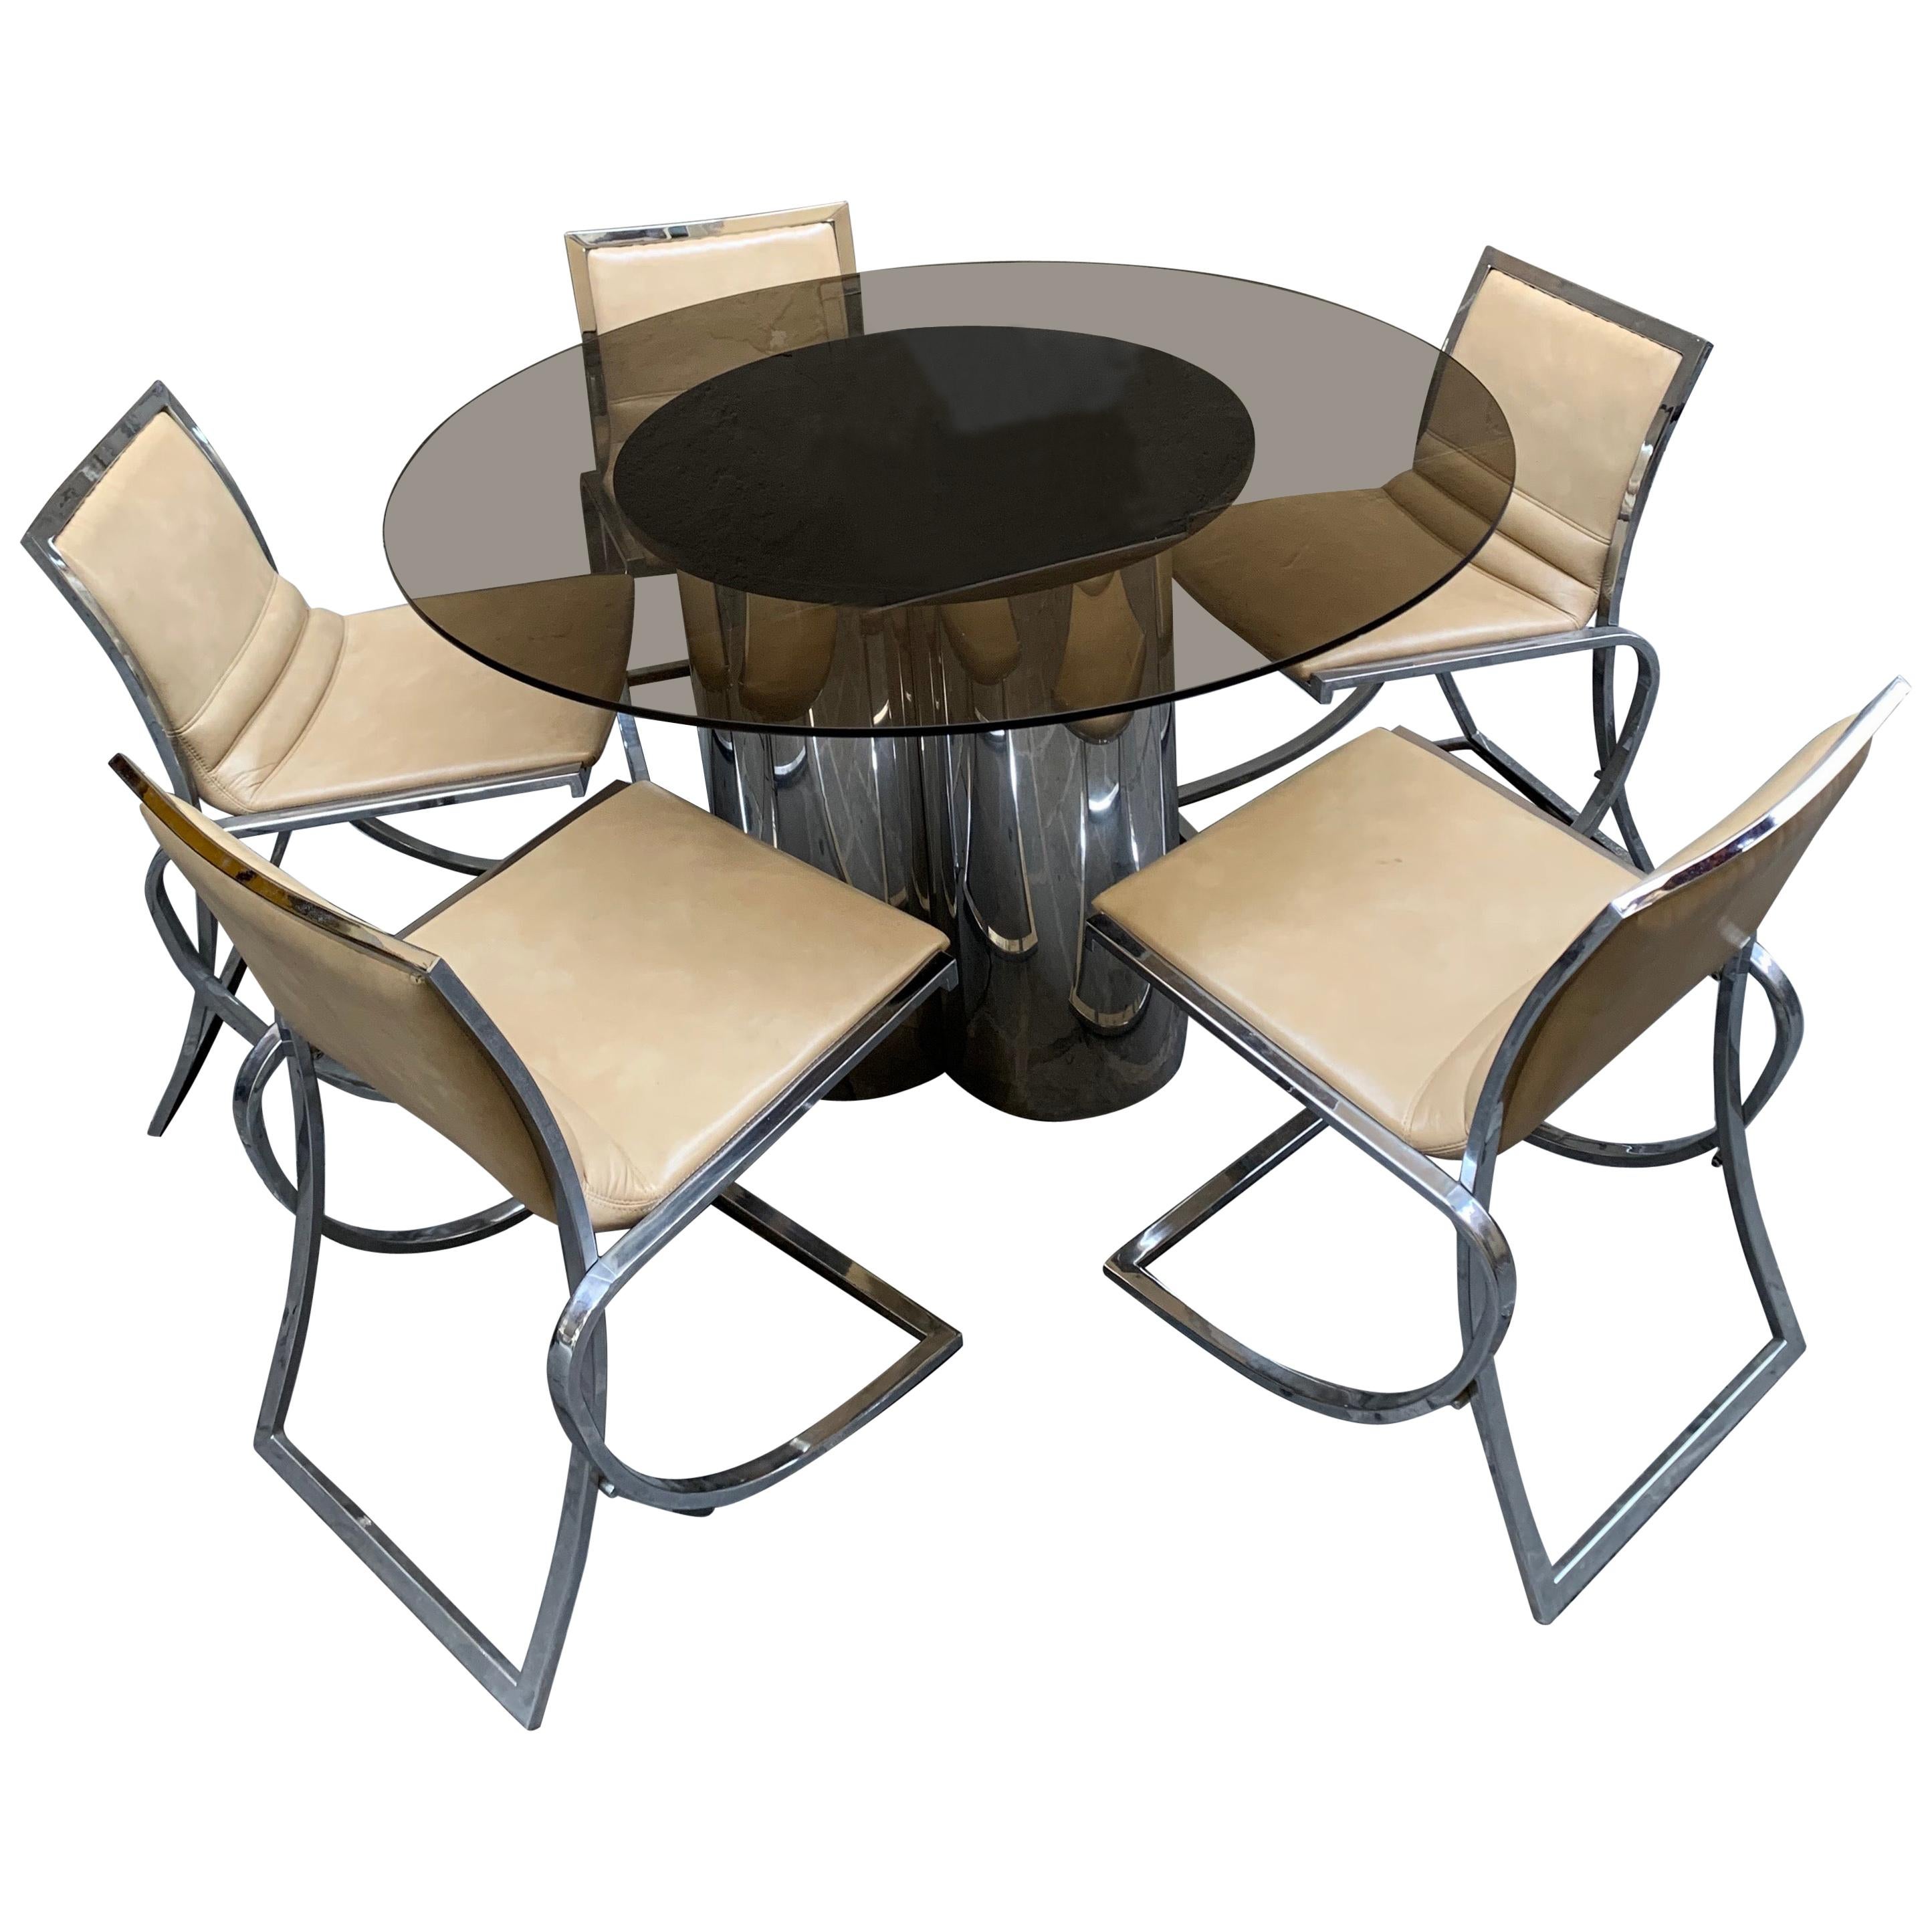 Vintage Round Dining Table and Set of Five Chairs with Chromed Fittings, 1970s